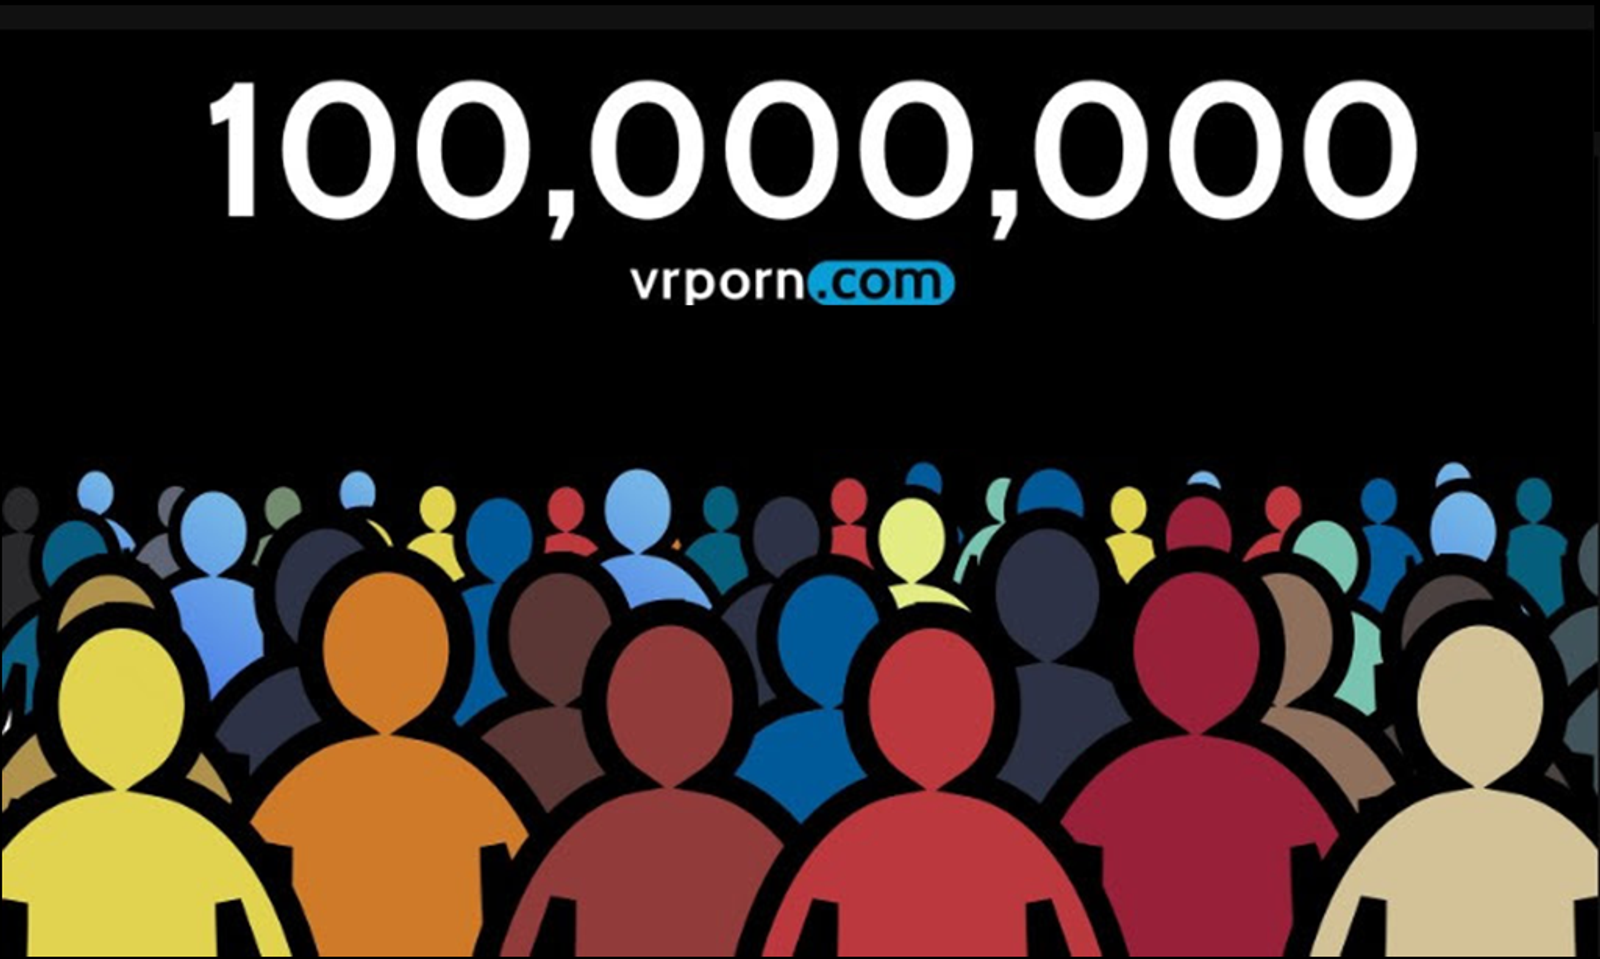 VRPorn.com Now In The Big Leagues With 100 Million Users